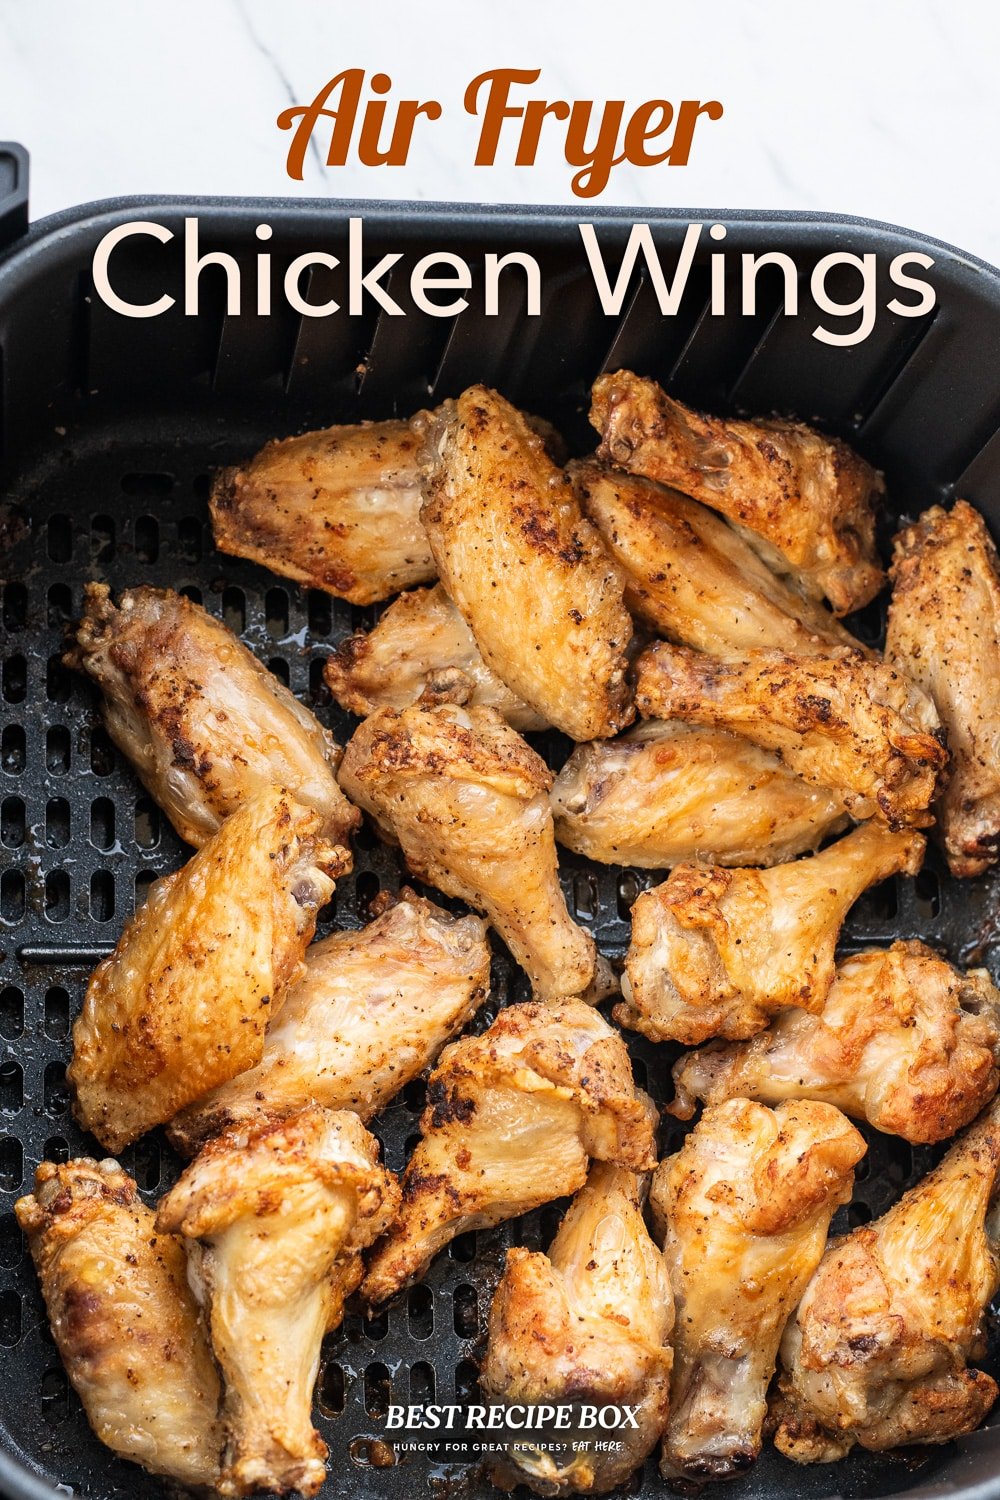 Best Air fryer Frozen Chicken Wings: Reviews And Rankings